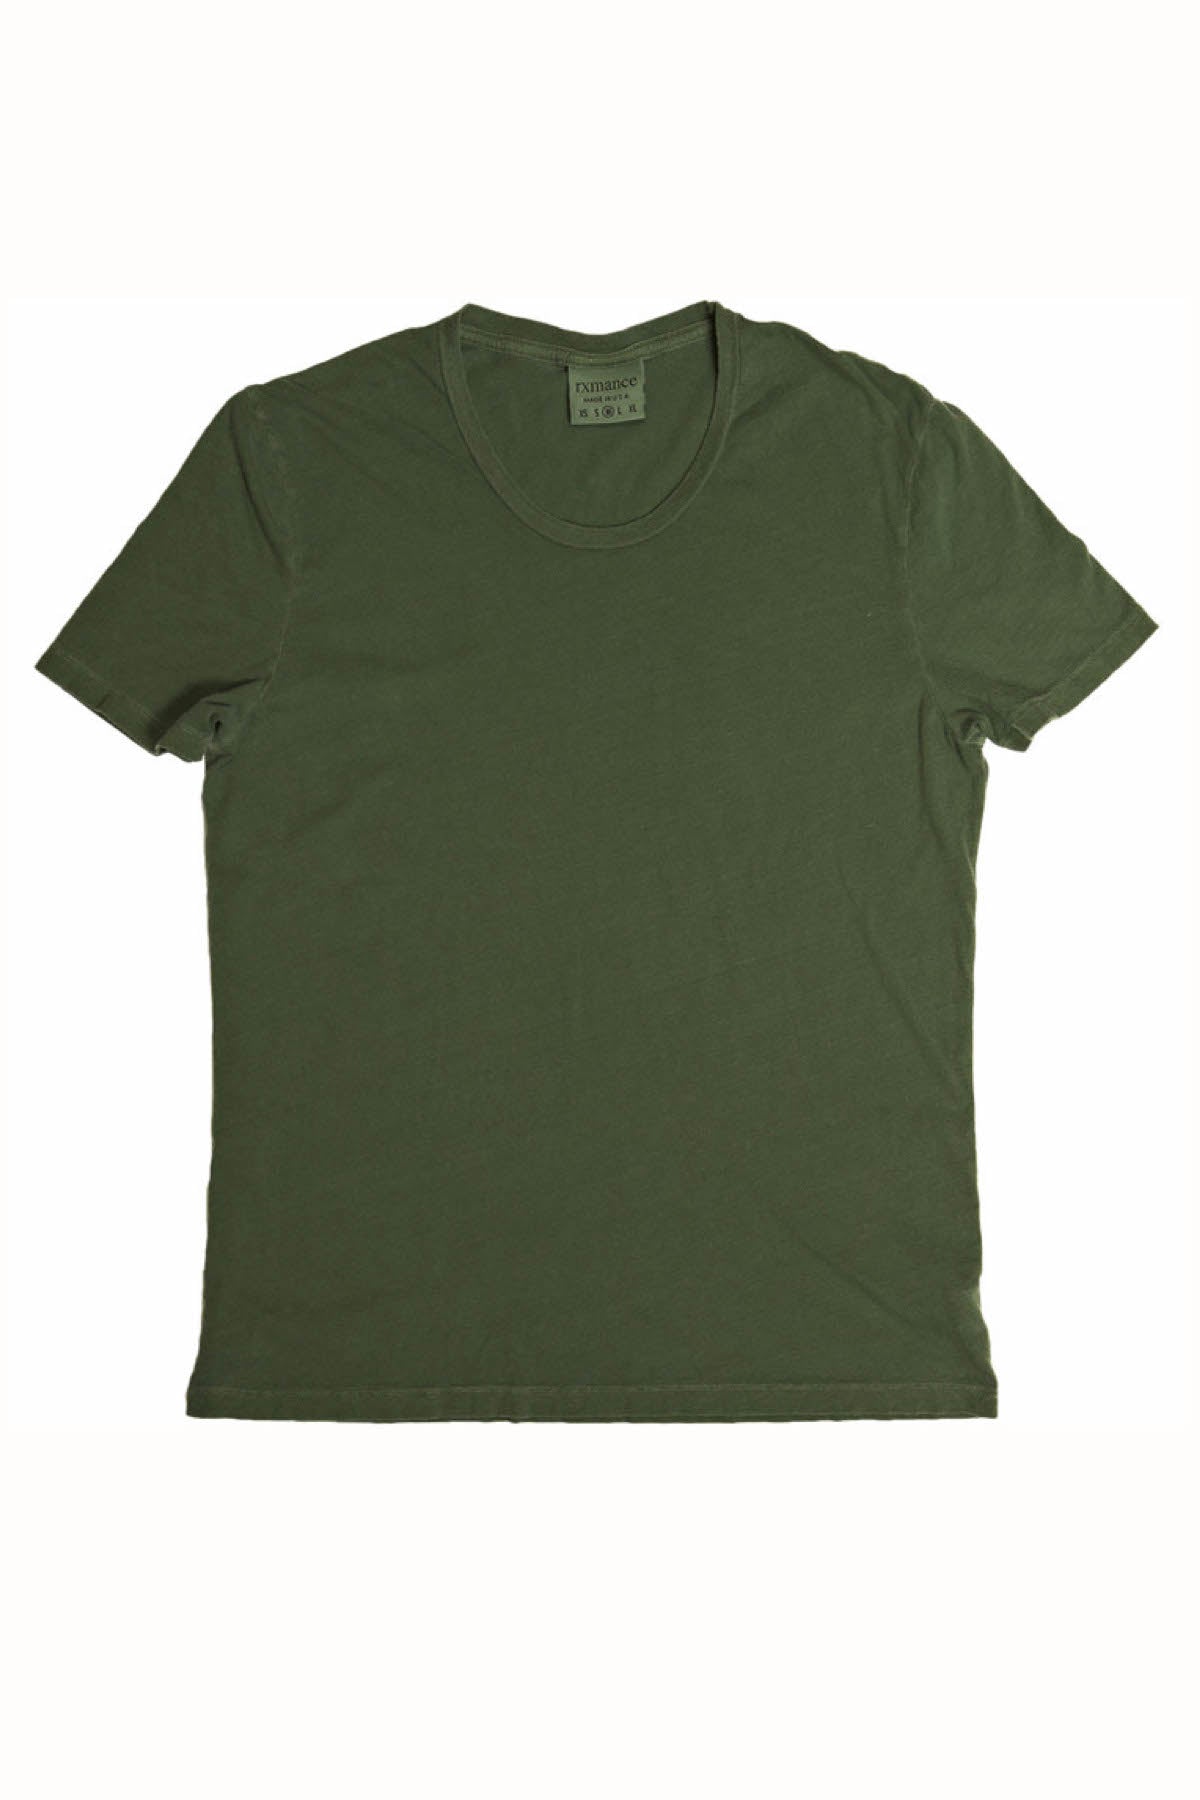 Rxmance Forest Green Lounge Tee